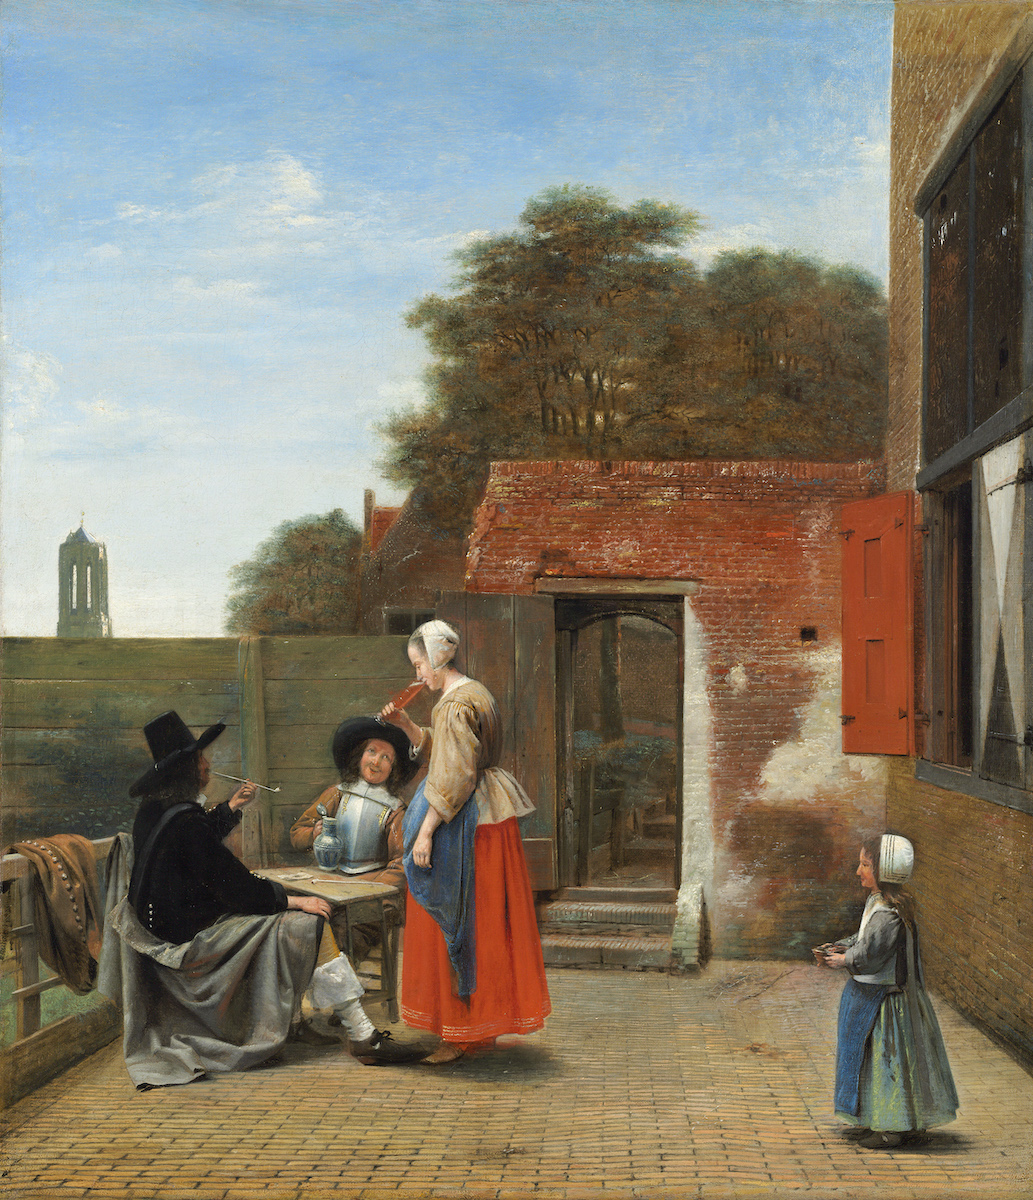 A Dutch Courtyard, ca. 1658-1660 / pic credit: Courtesy National Gallery of Art, Washington, Andrew W. Mellon Collection, 1937.1.56